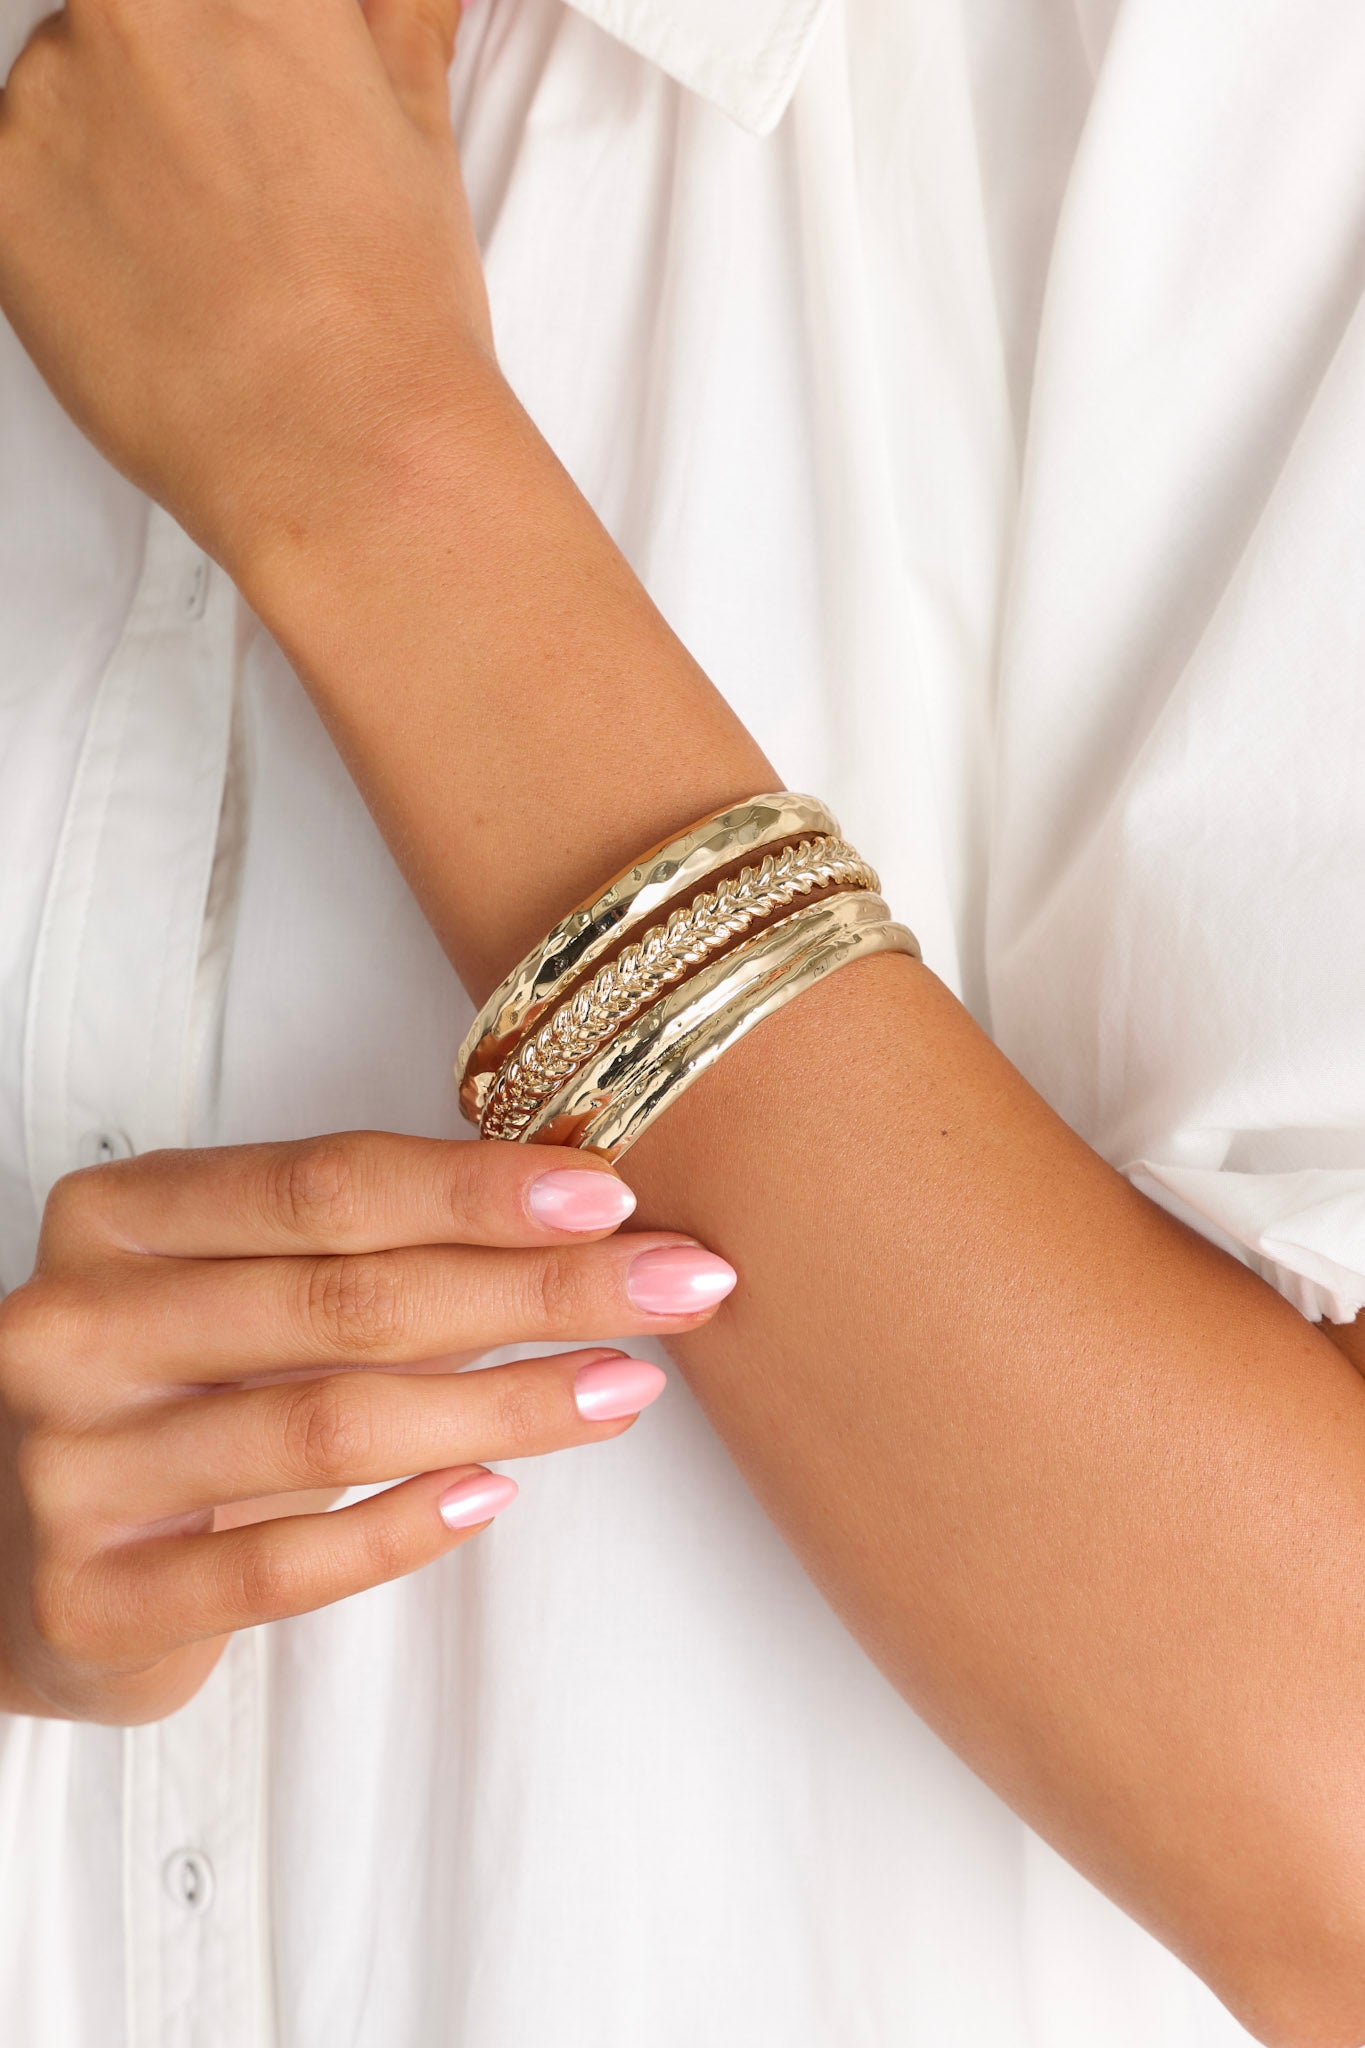 These gold bangles feature gold hardware, two textured bangles, and one bangle with a braided design.